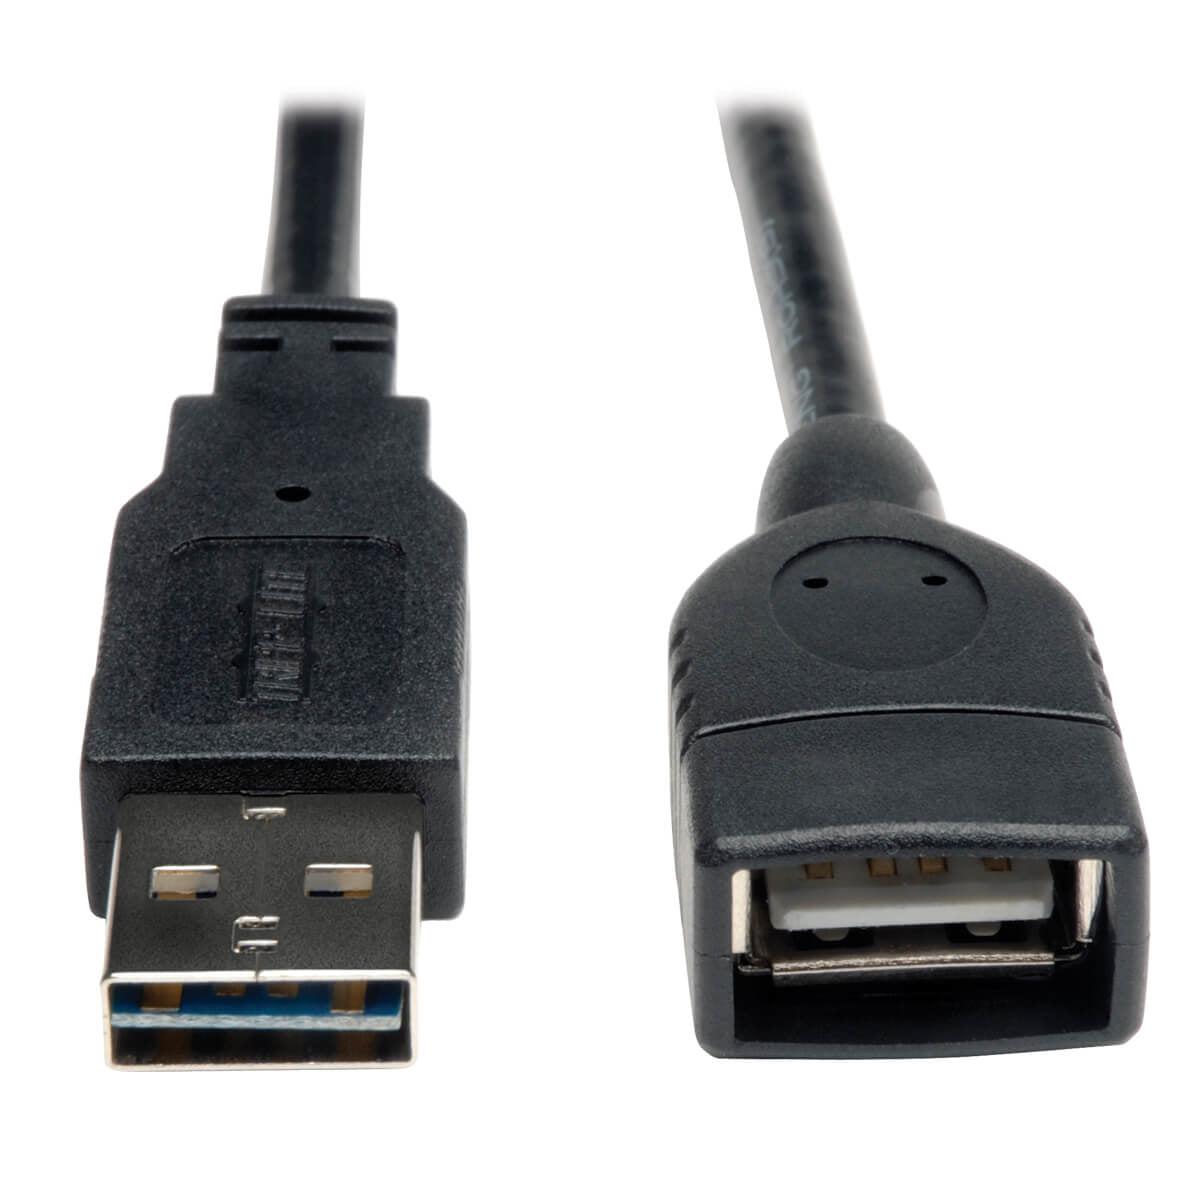 Tripp Lite Ur024-001 Universal Reversible Usb 2.0 Extension Cable (Reversible A To A M/F), 1 Ft. (0.31 M)